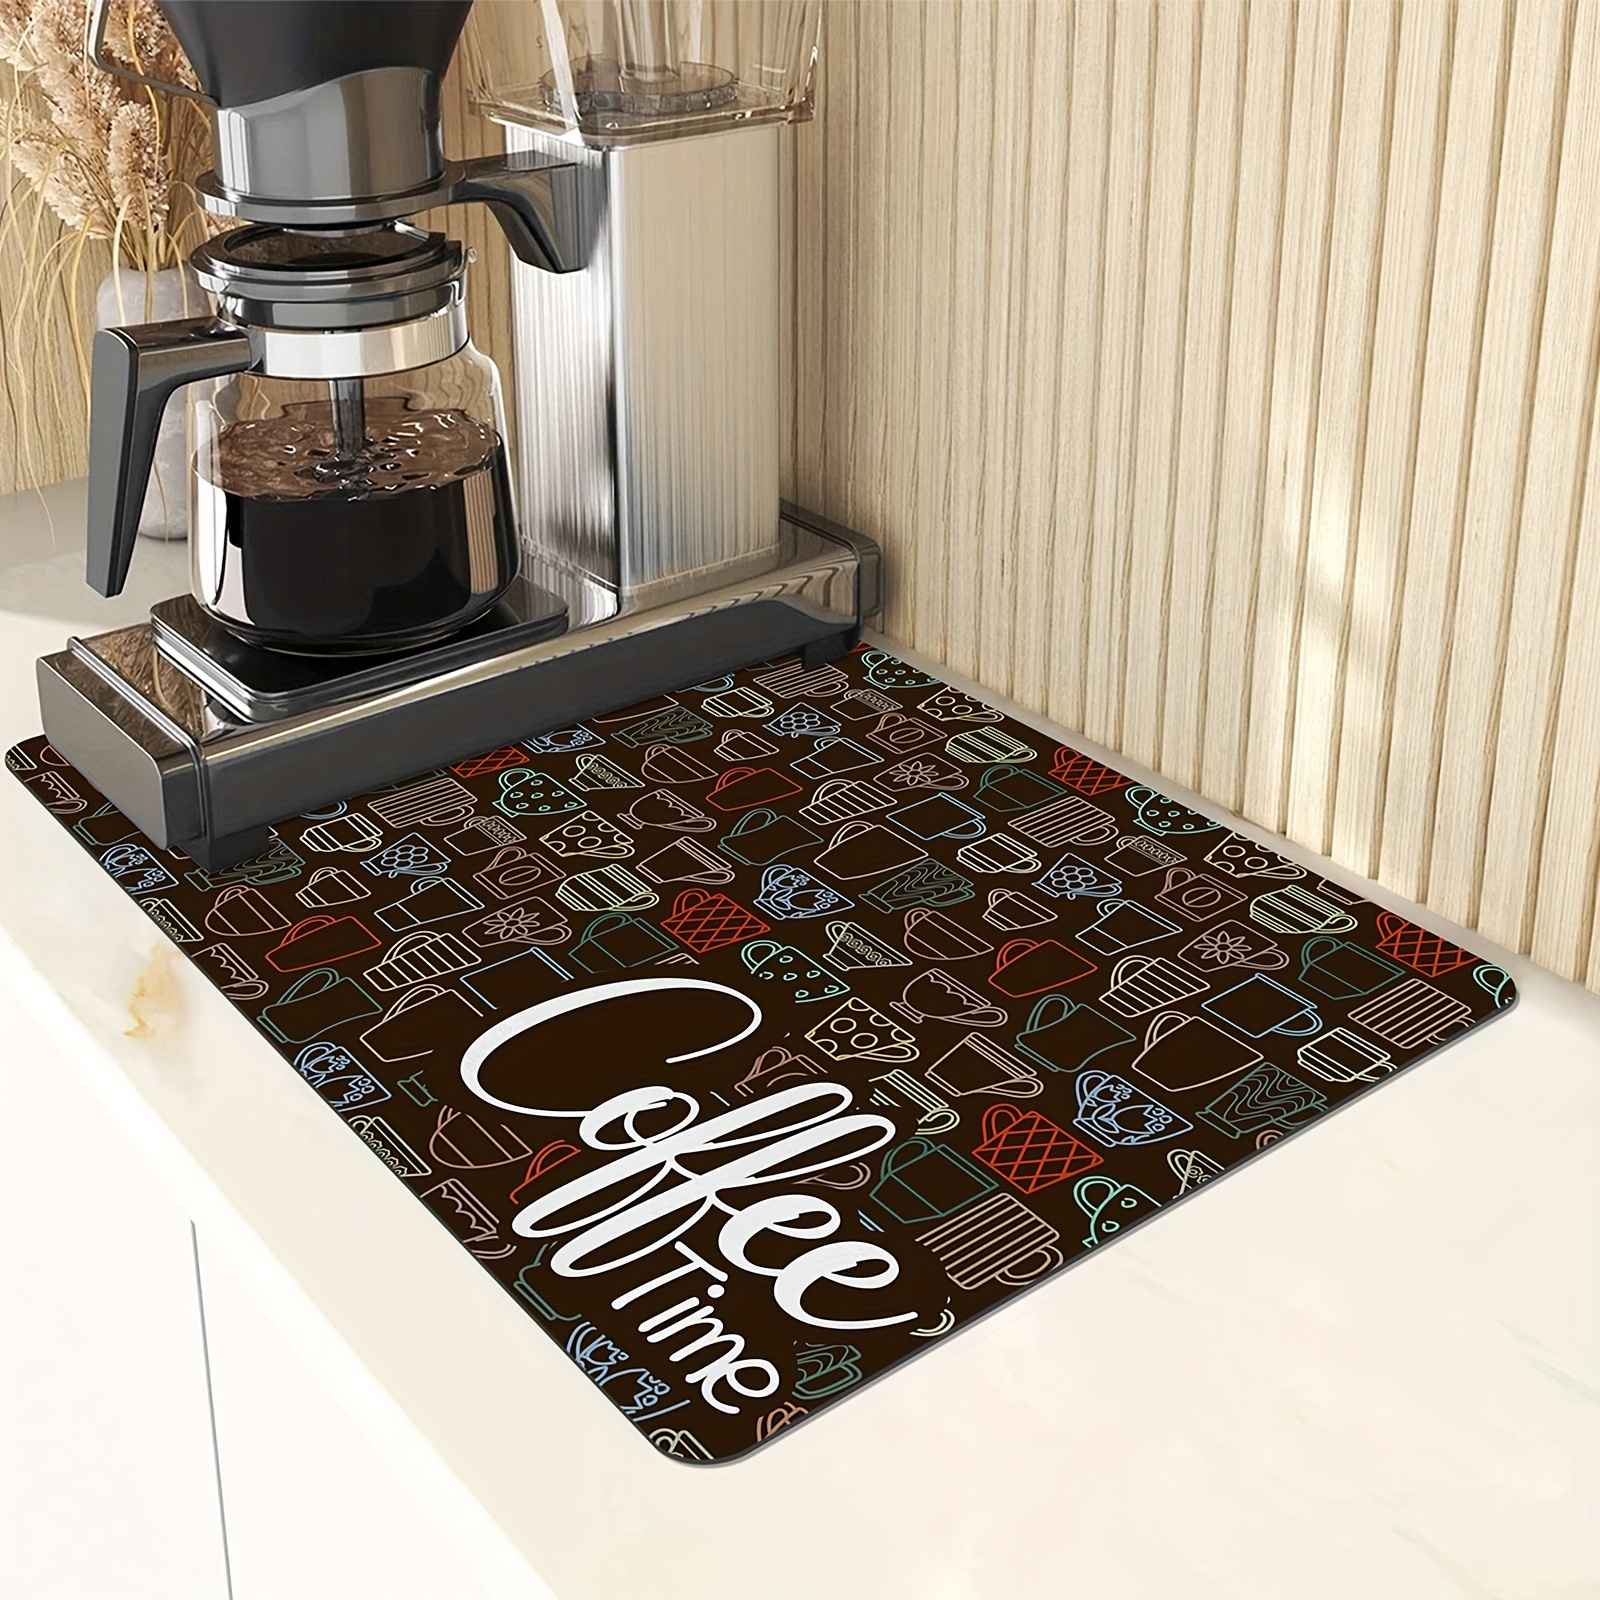 Quick Dry Coffee Mat, Coffee Bar Accessories, Non-slip Floral Boho